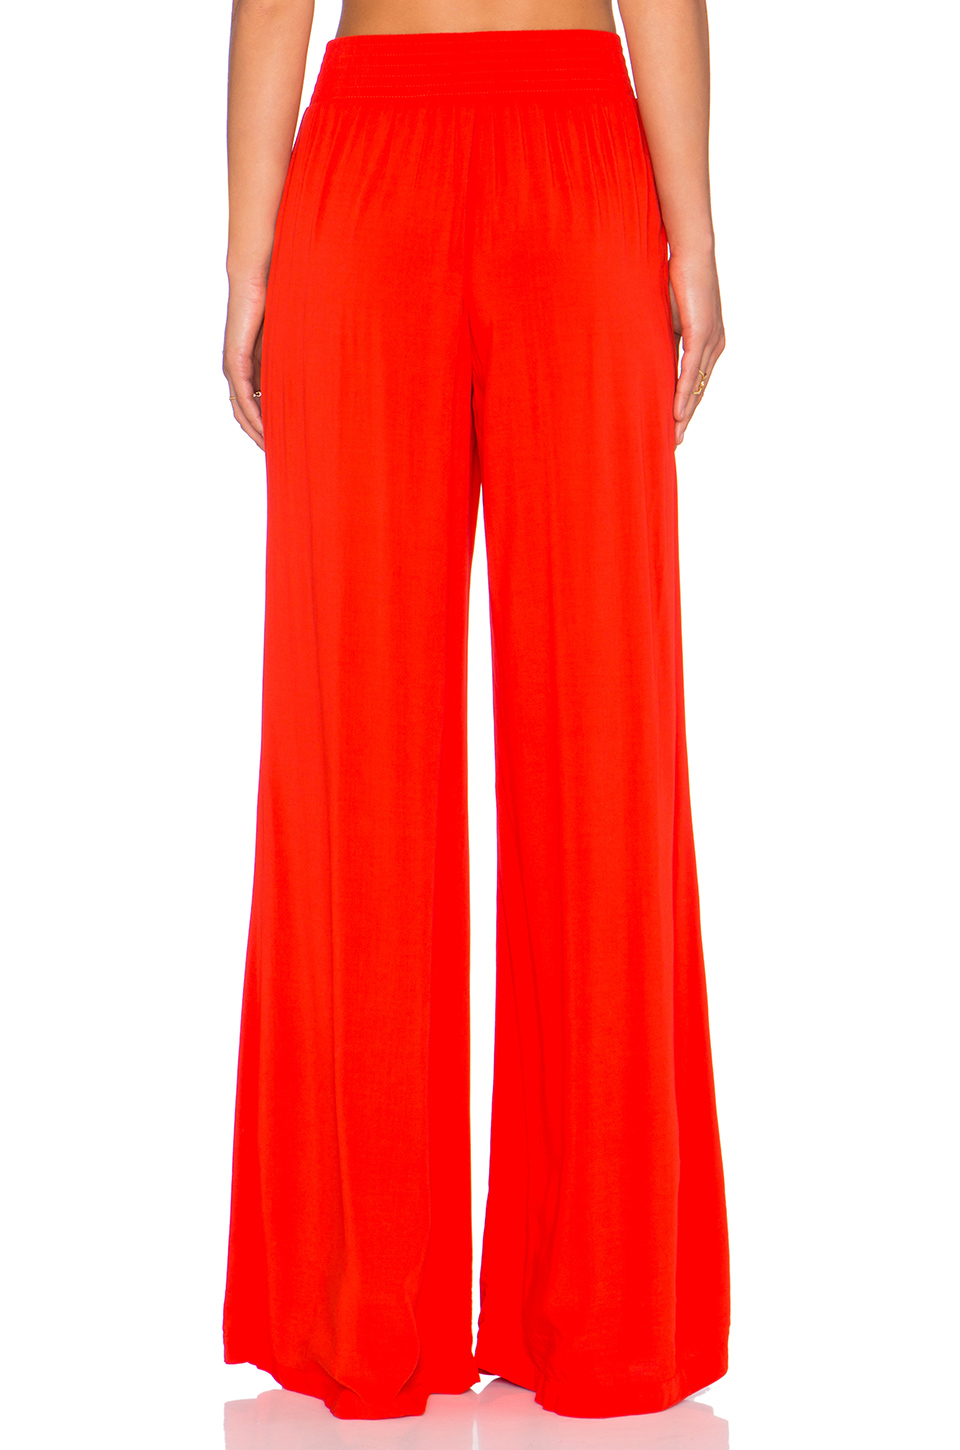 Lyst - Michael Stars High Waist Wide Leg Pant in Red